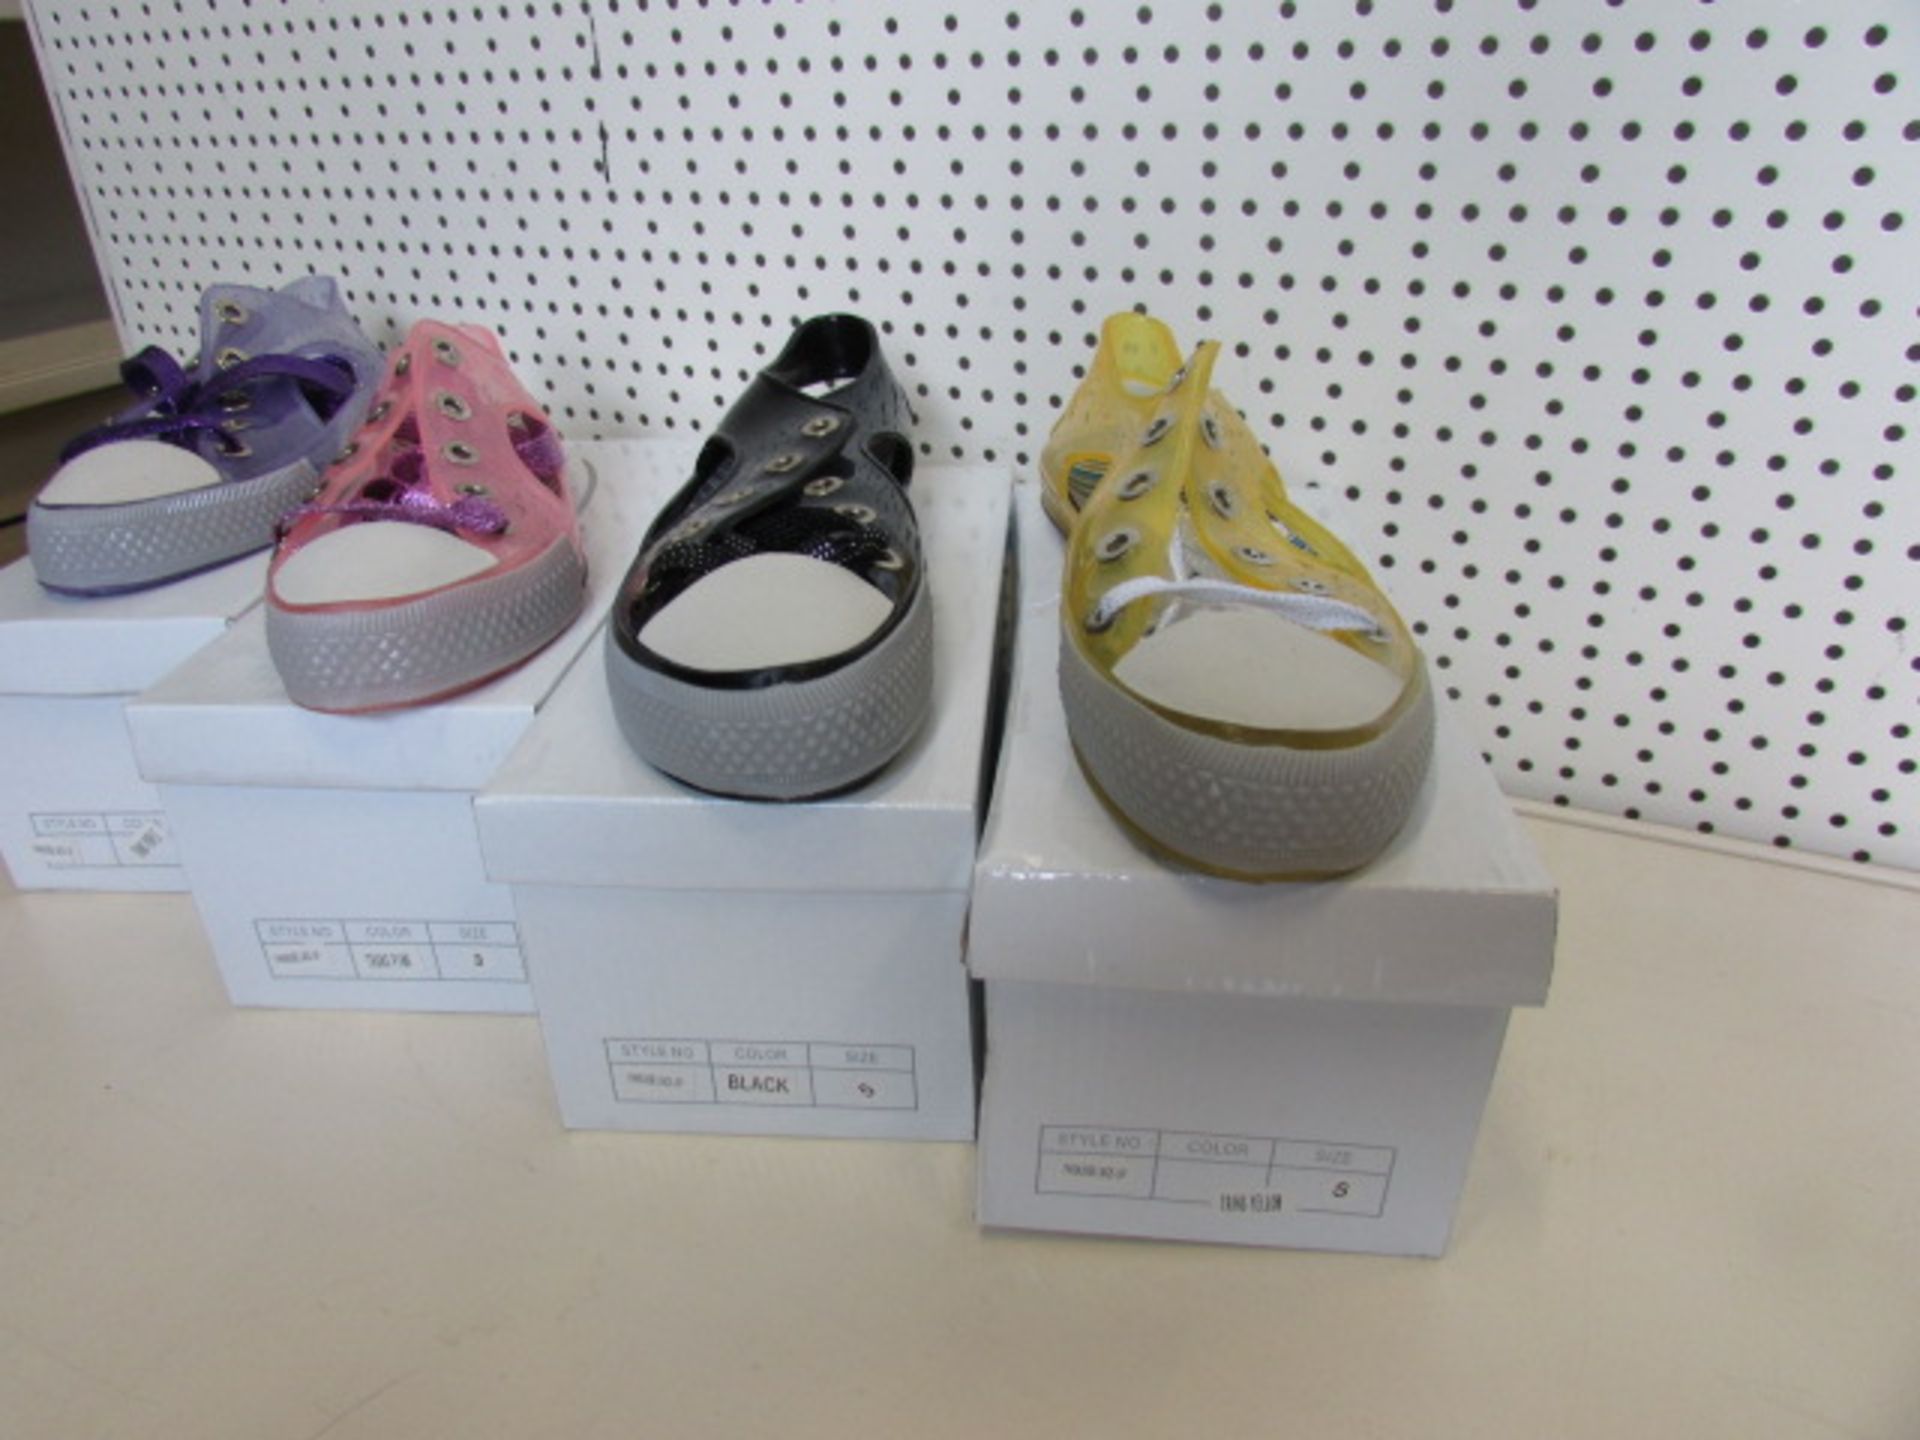 10 x Cyclone Paradise Lace Up Shoes In Various Sizes & Colours - Image 2 of 3